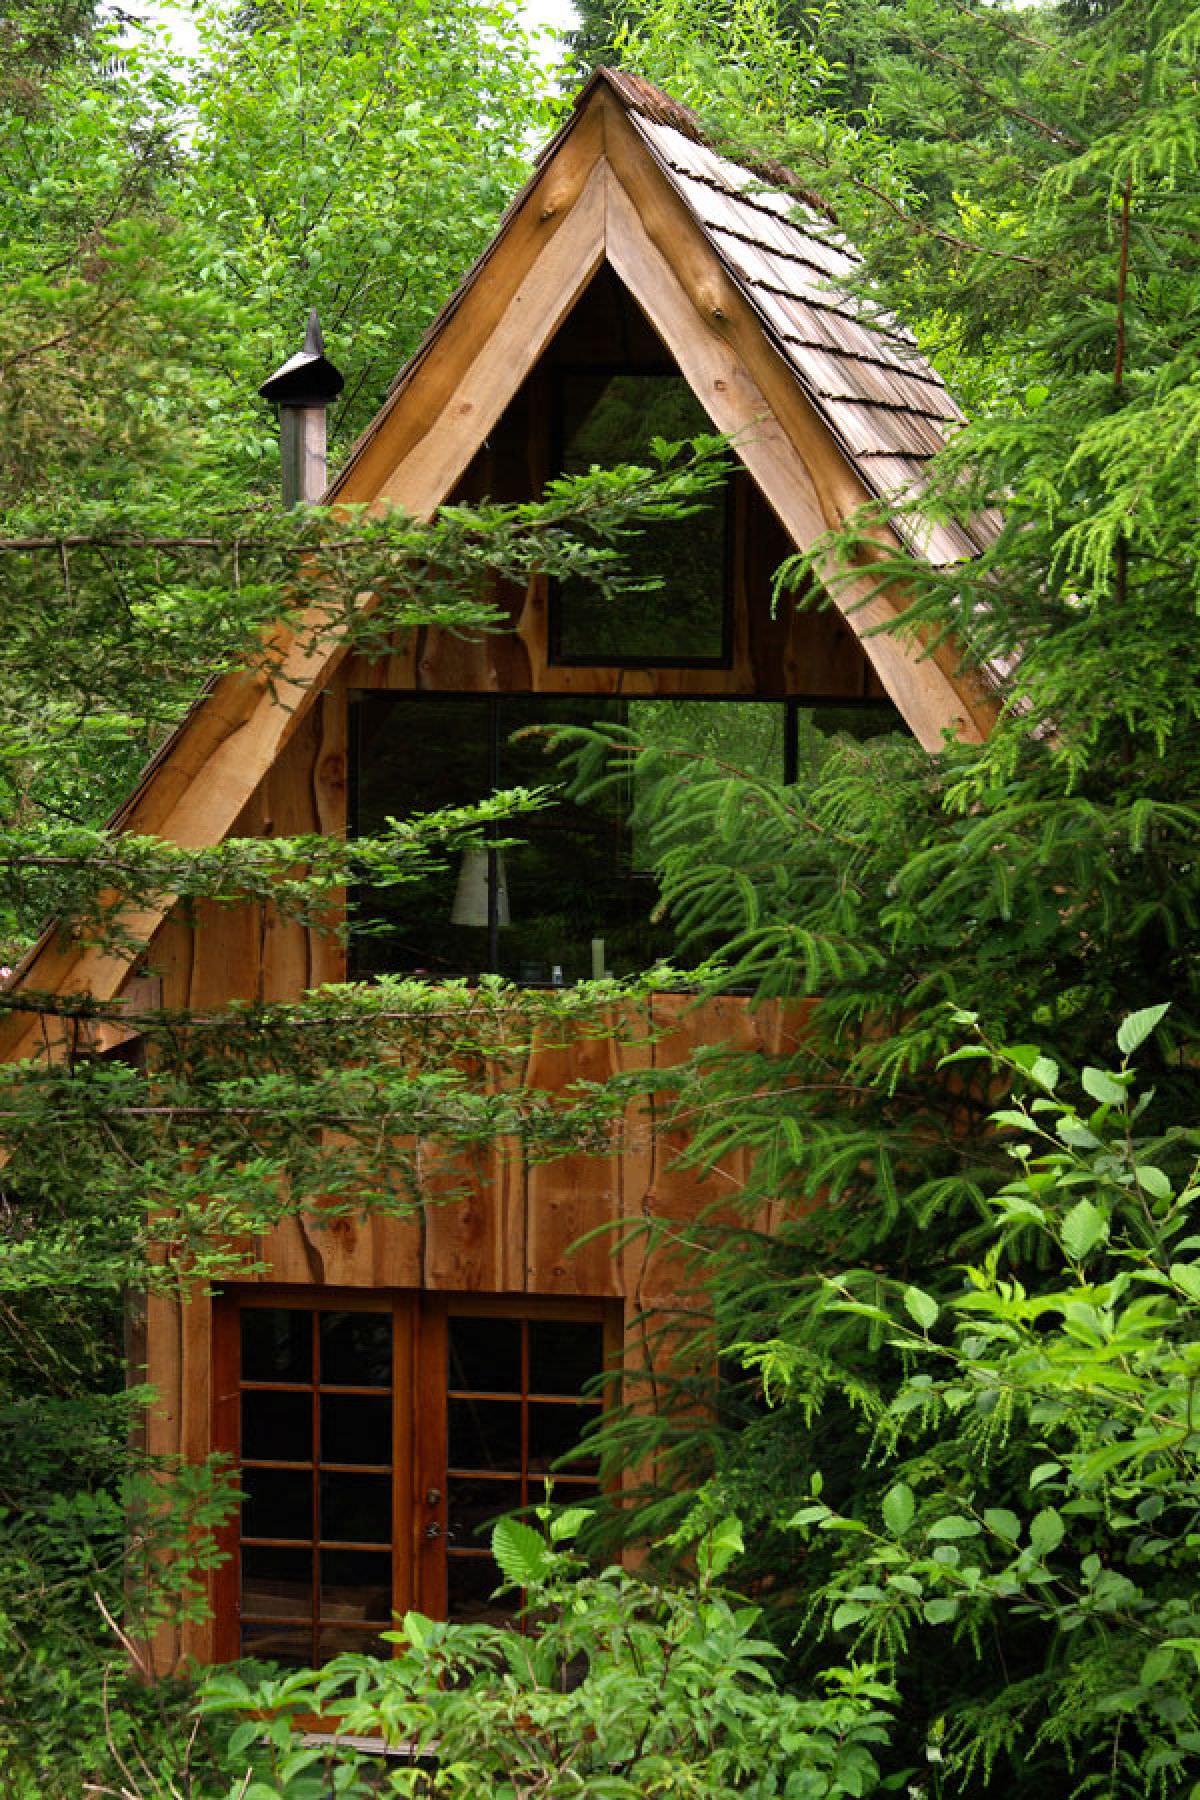 51_A-Lovely-Forest-Home-Built-With-A-11000-Budget_0-f_mini